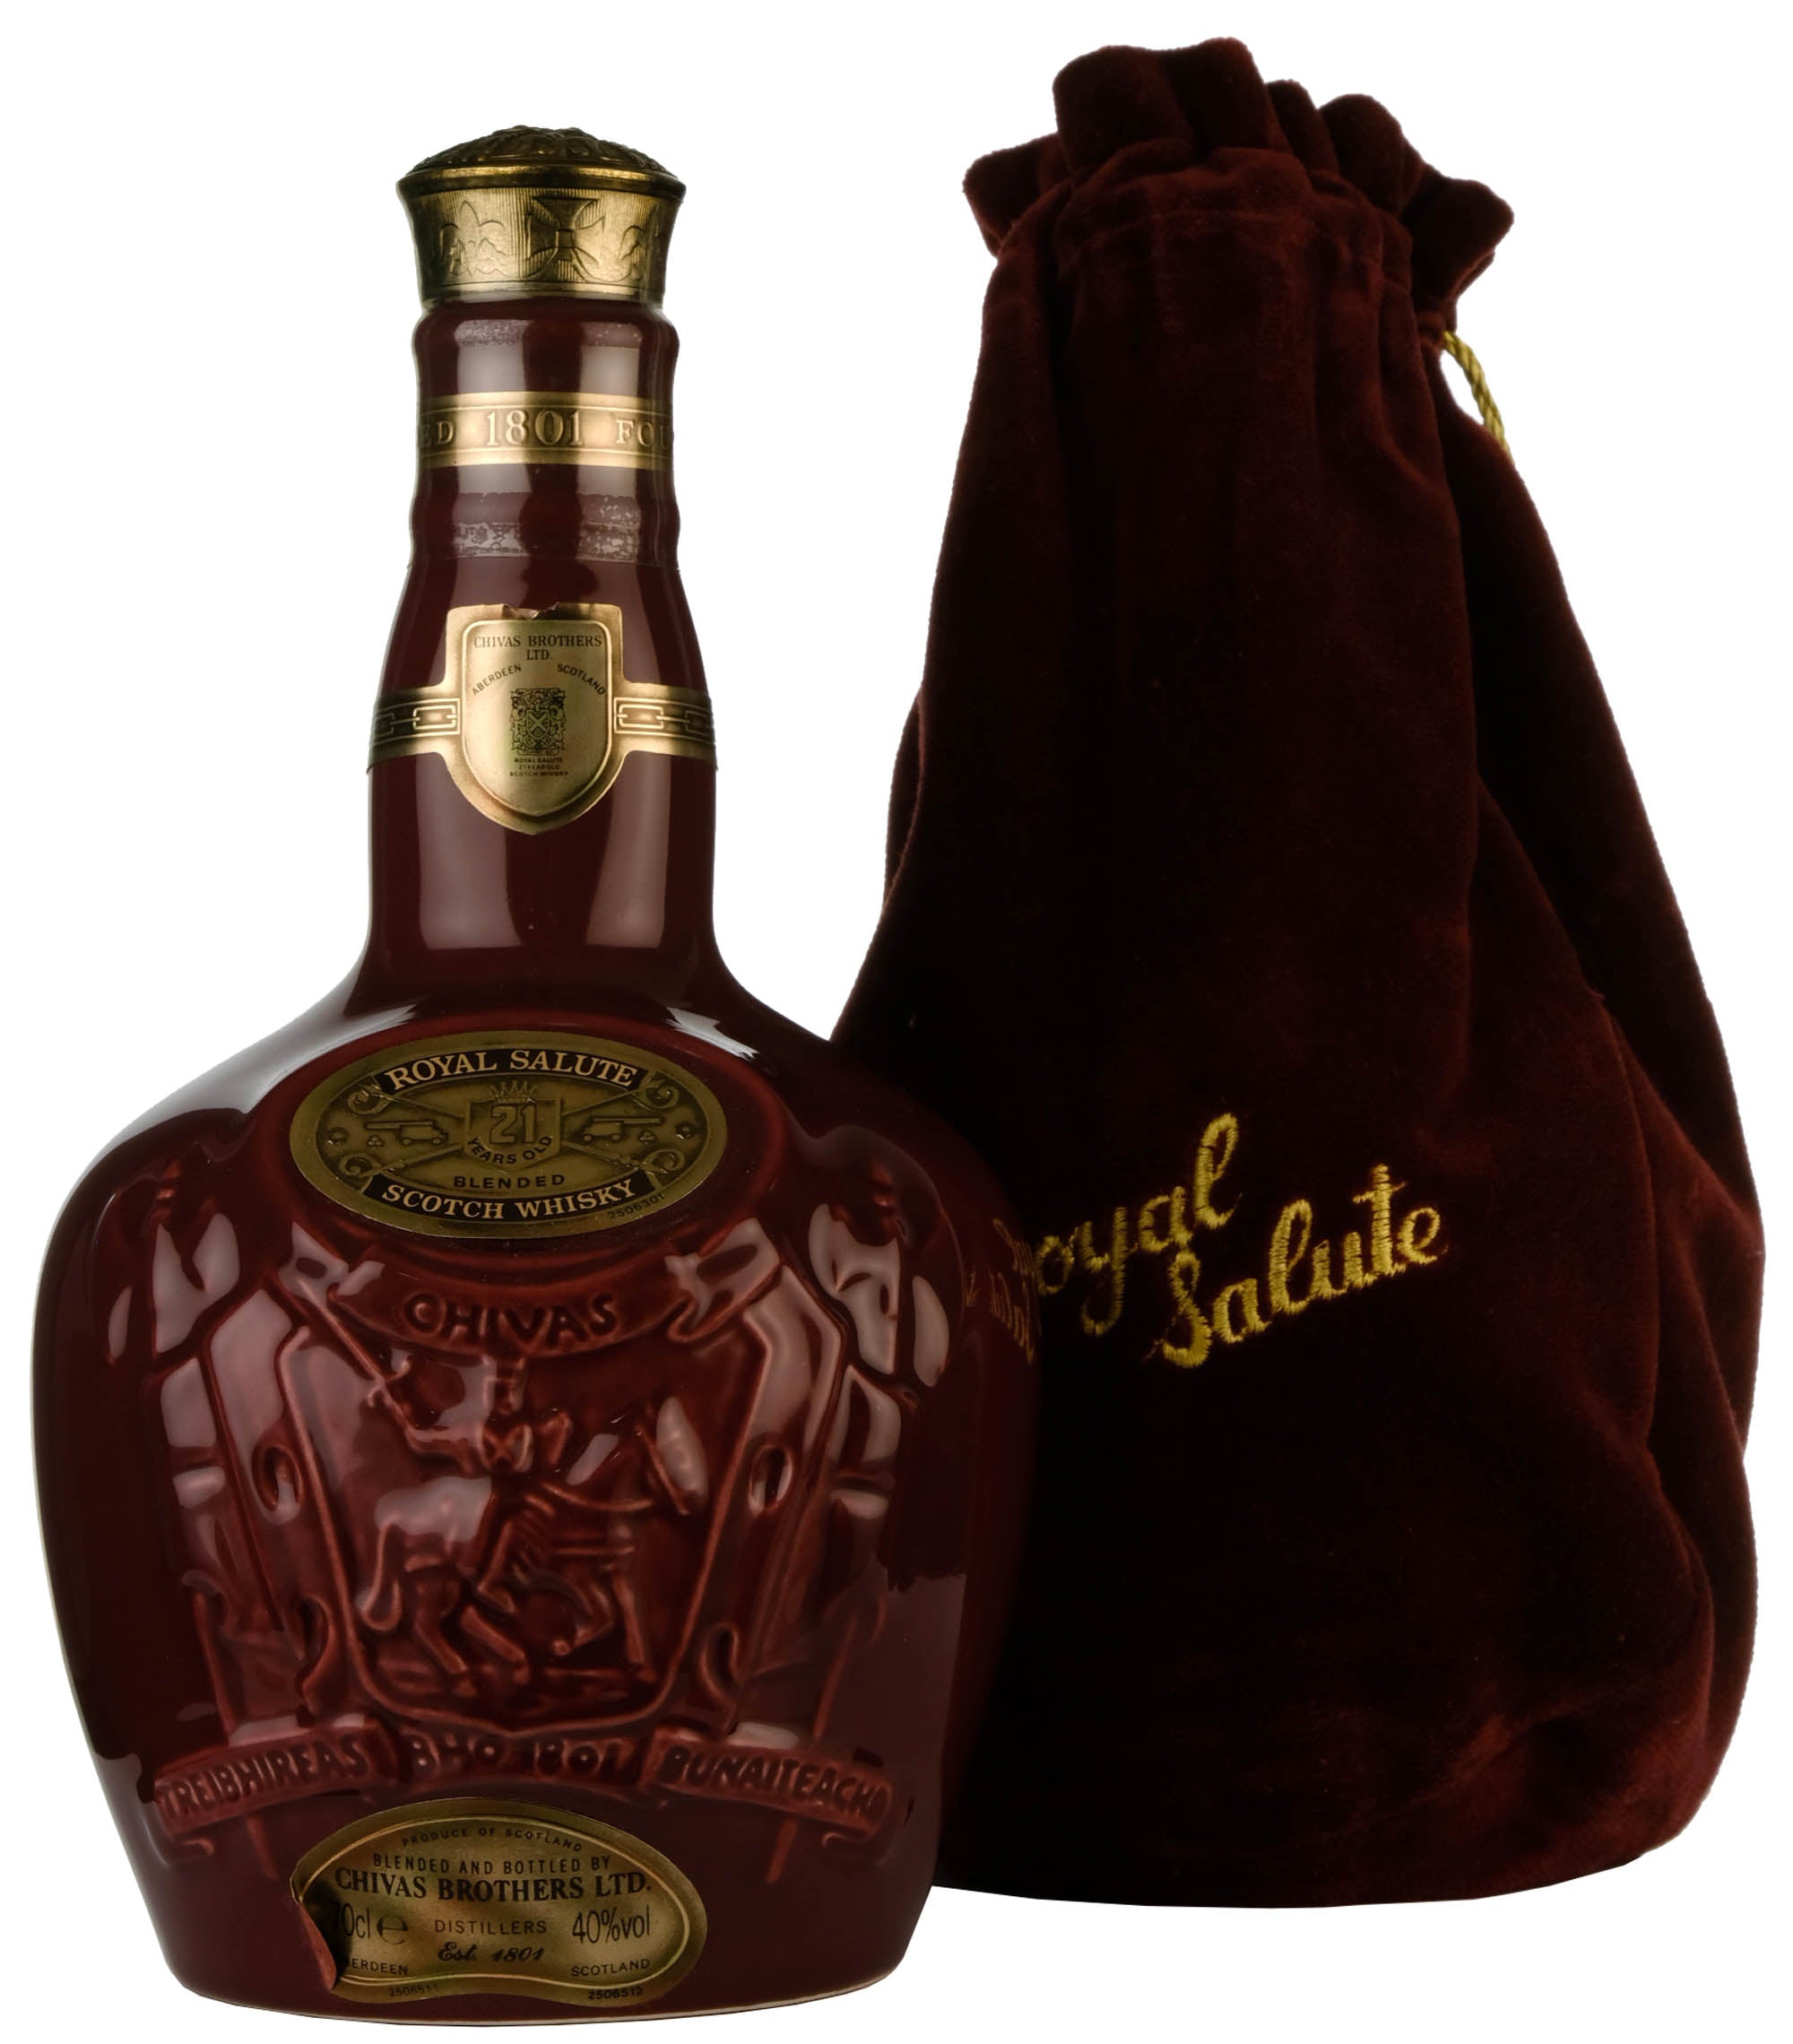 Clan Campbell 5 Years Old - Just Whisky Auctions